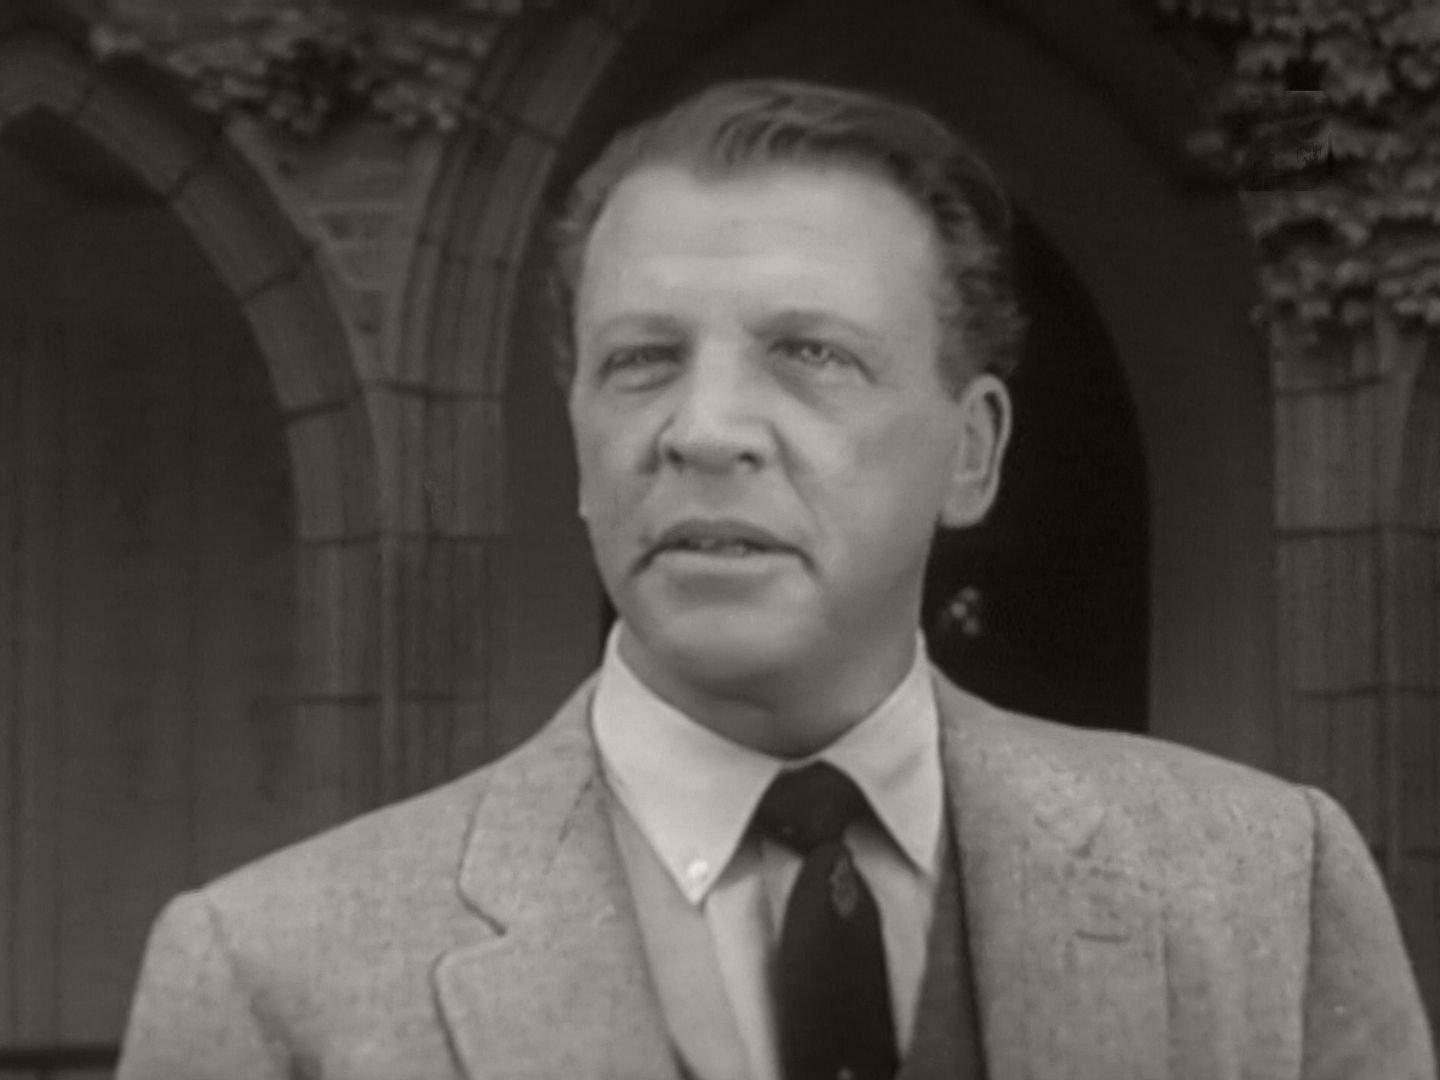 Screenshot from the 1959 ‘The Battle of the Bridge’ episode of The Four Just Men (1959-1960) (1) featuring Dan Dailey (as Tim Collier)